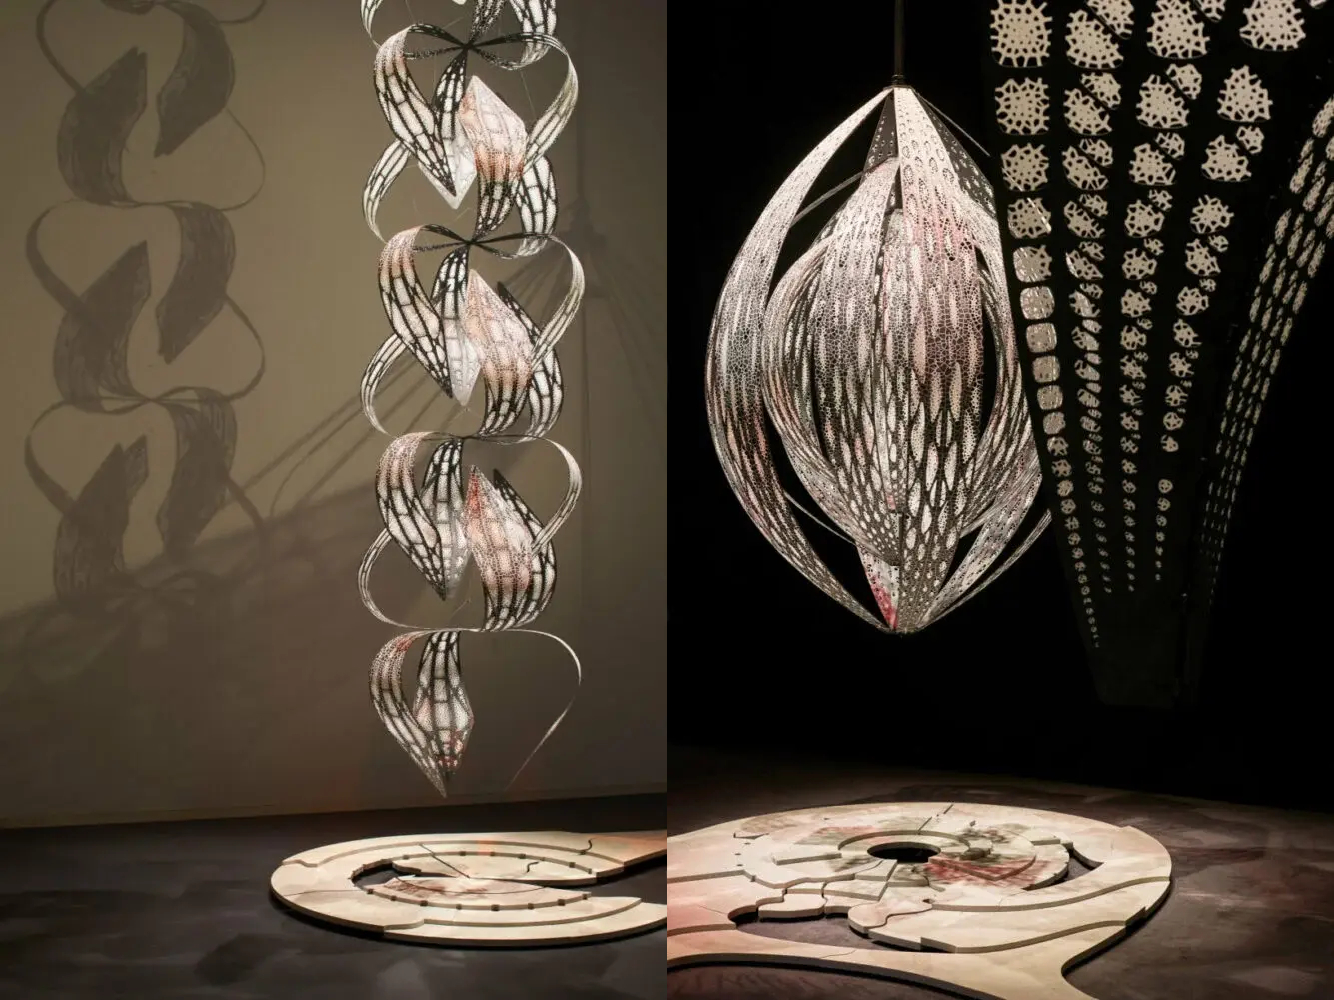 Lighting lamps provide shadows with unique patterns of kinetic sculptures on the walls, photo by DesignBoom